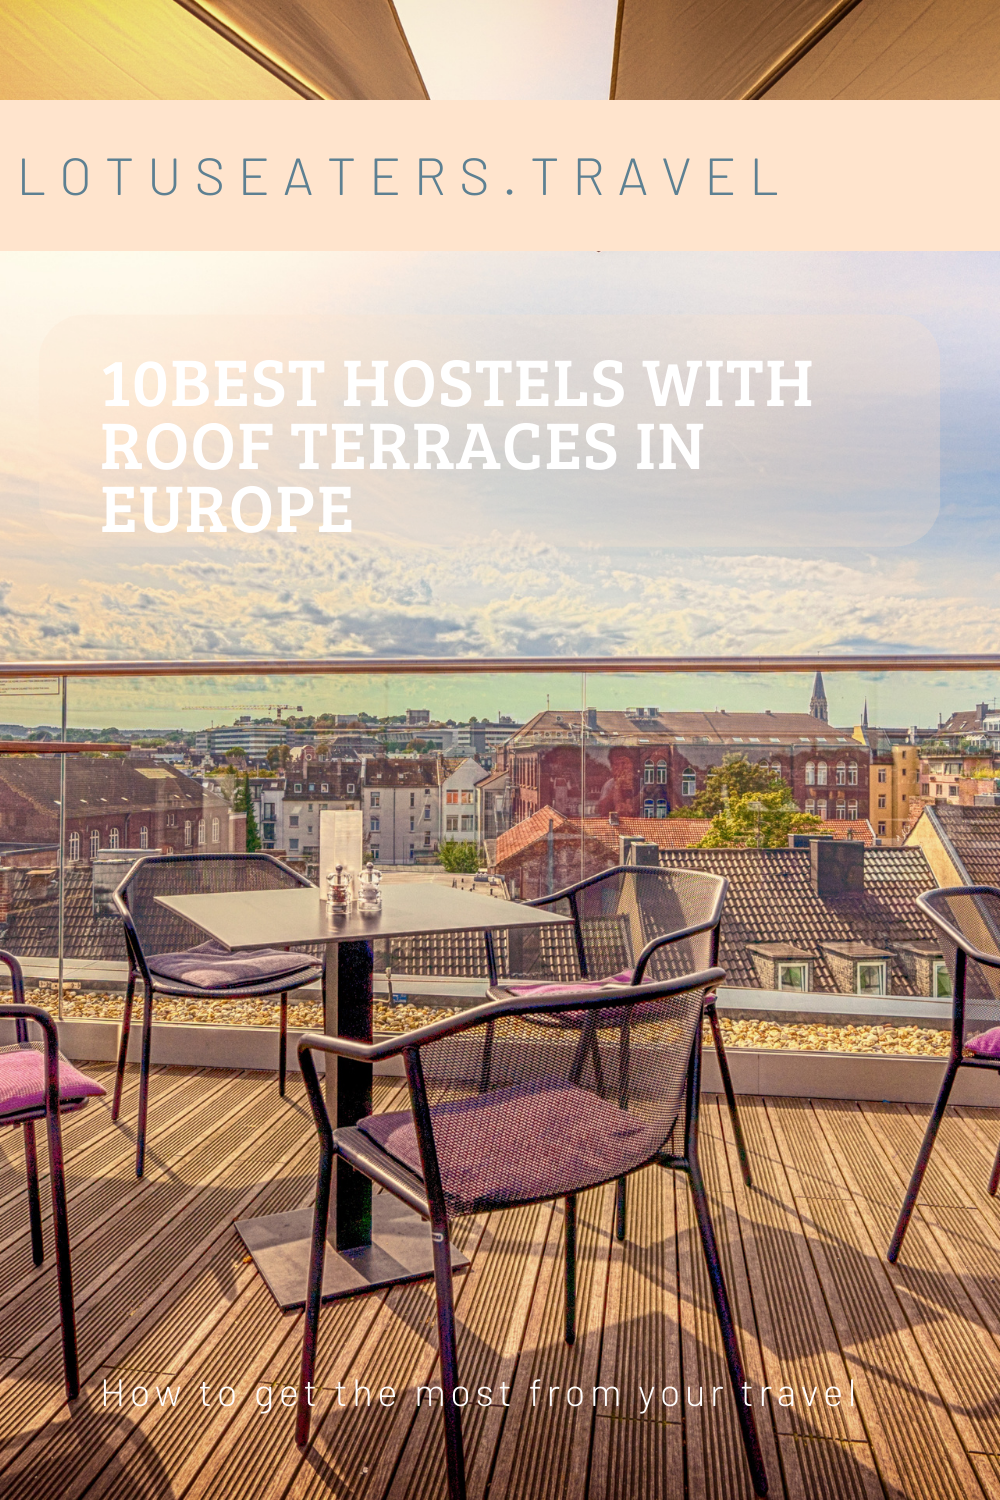 10 best hostels with roof terraces in Europe